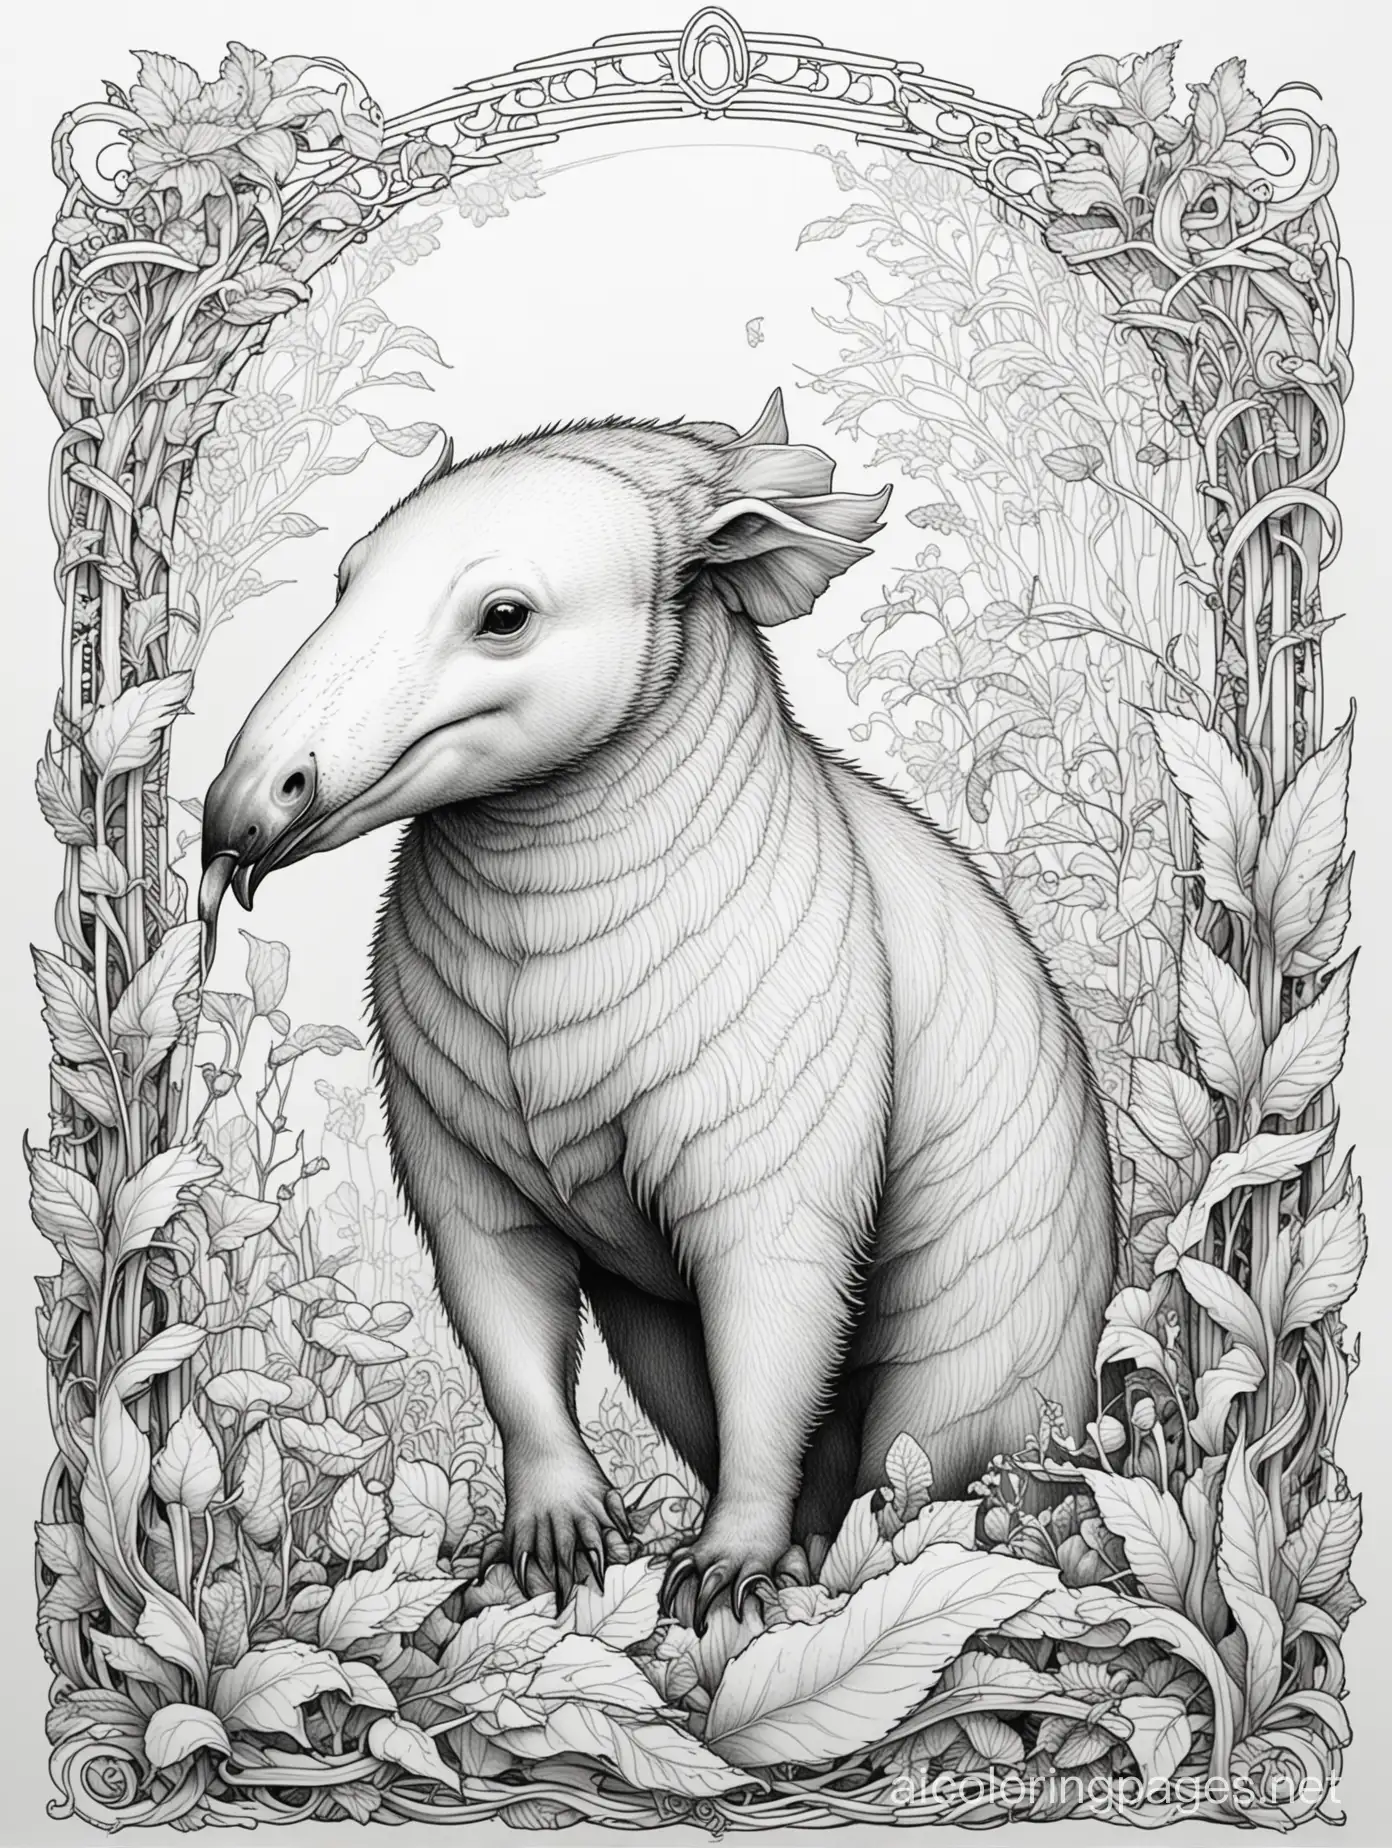 Ethereal-Fantasy-Anteater-Coloring-Page-Inspired-by-James-Jean